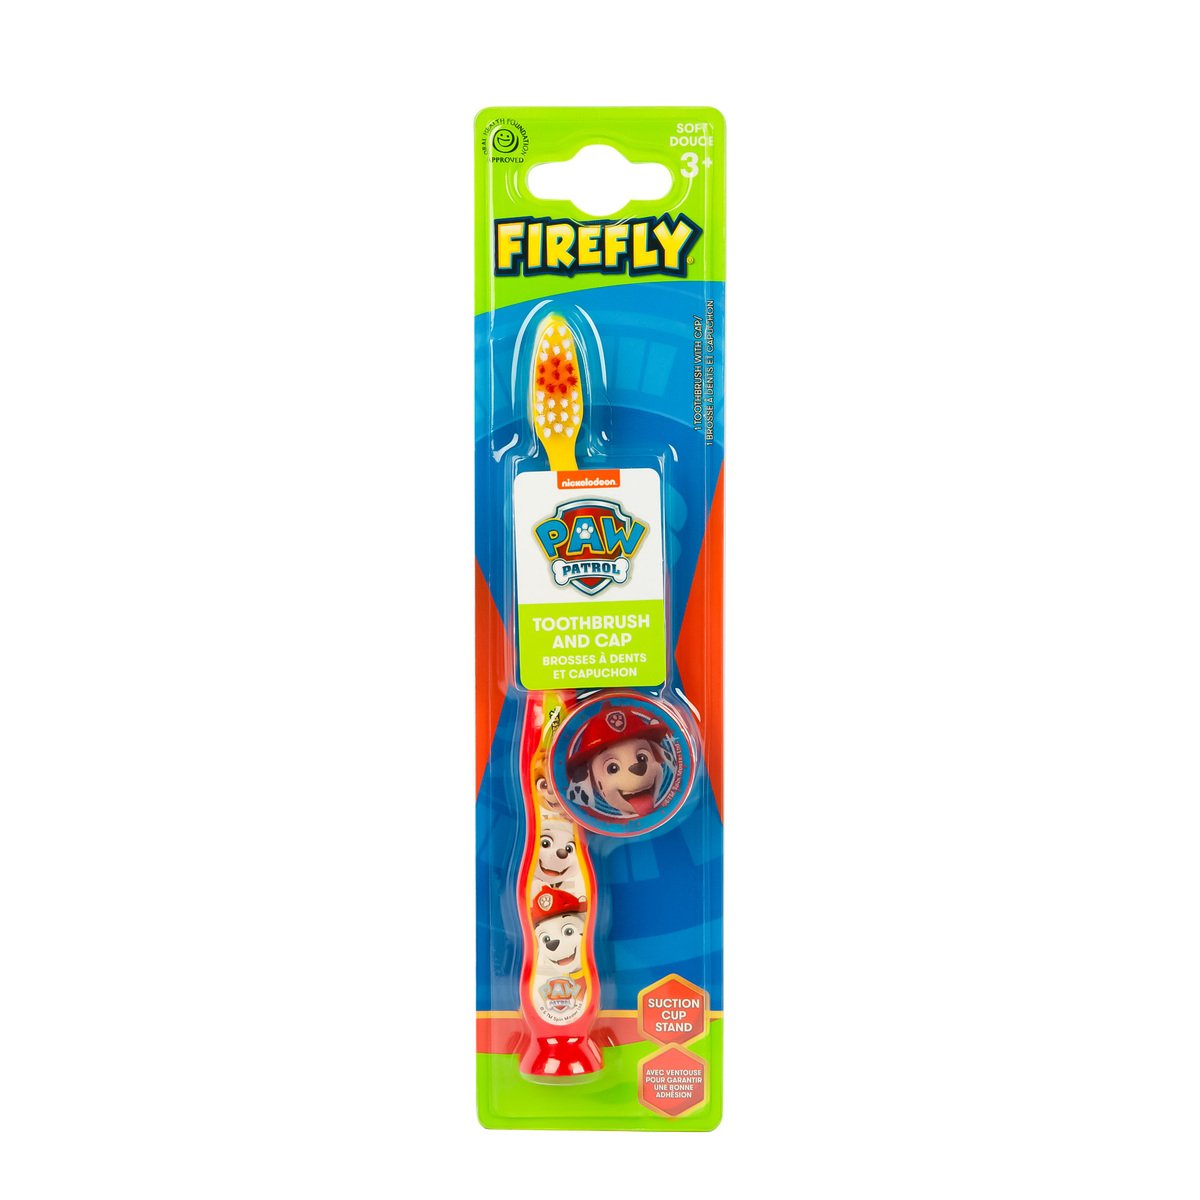 Firefly Paw Patrol Toothbrush with Cap Soft 1 pc